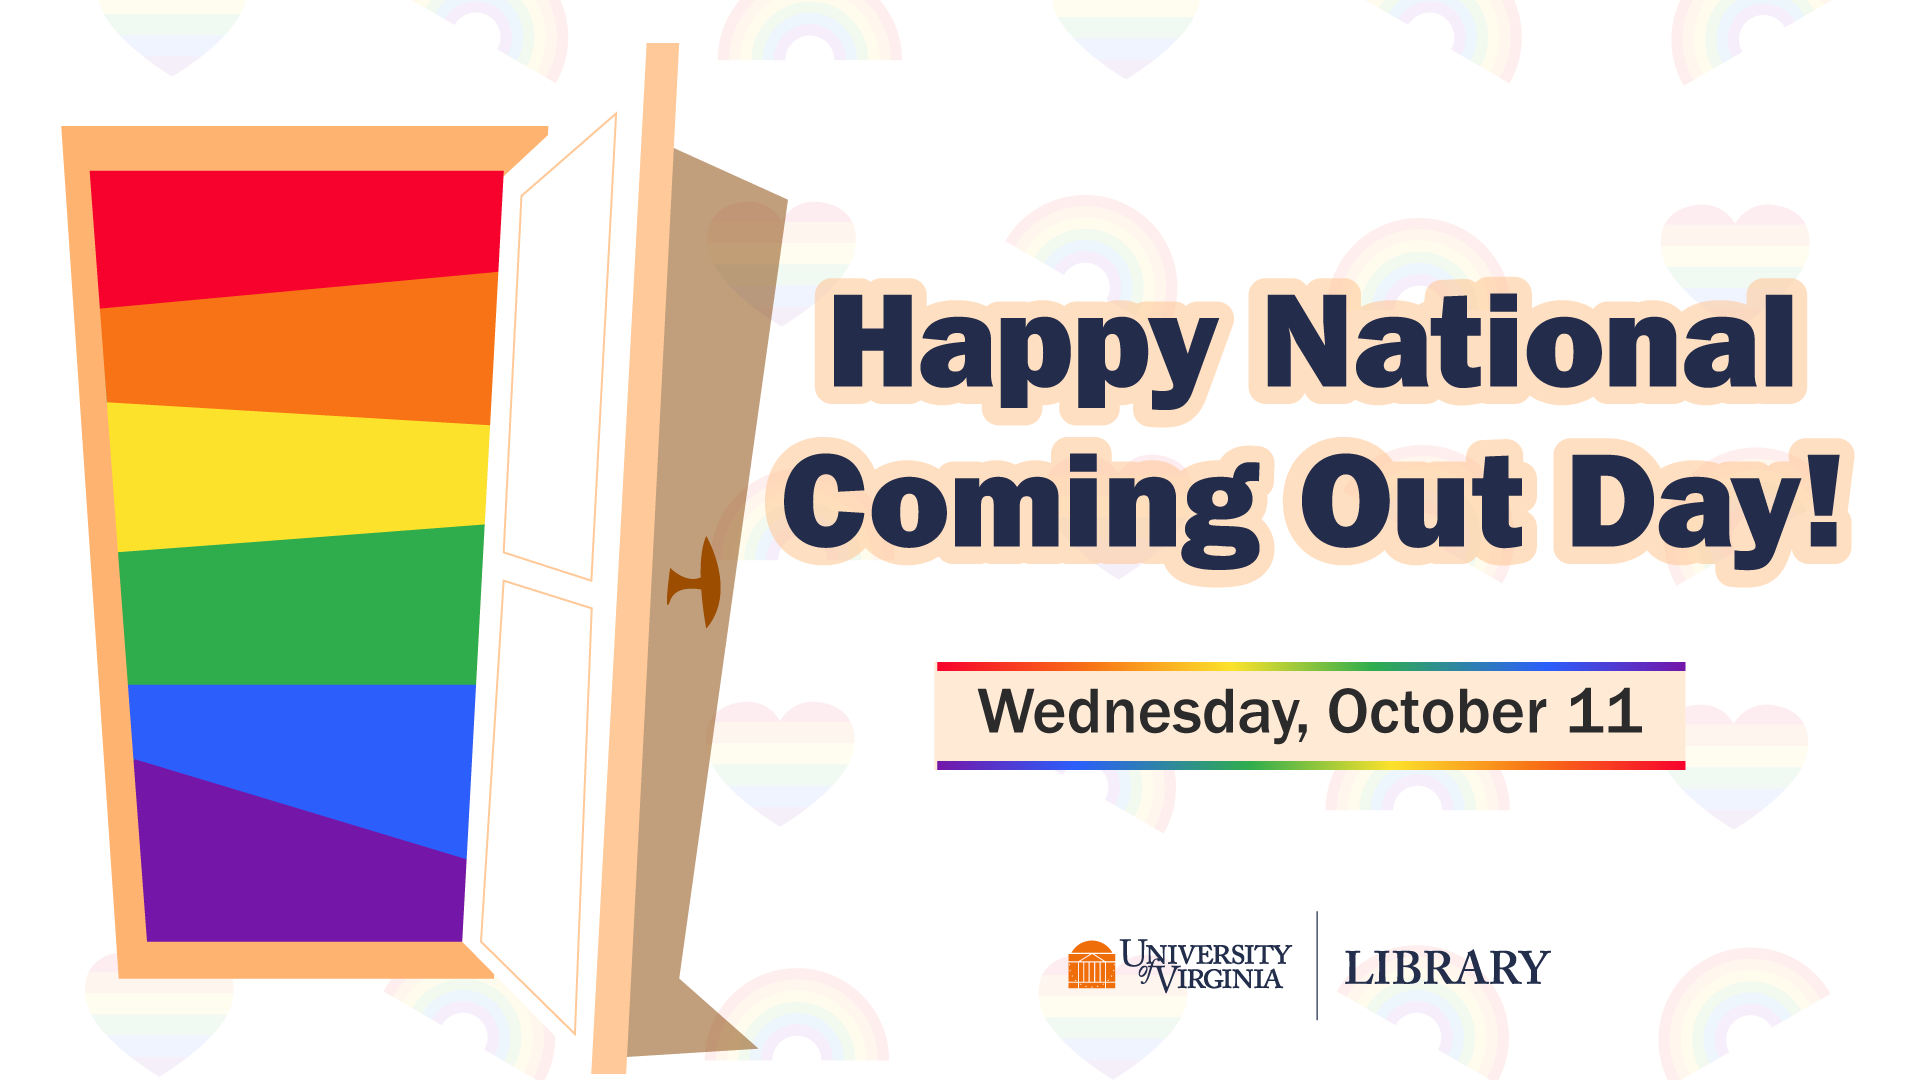 Happy National Coming Out Day! Wednesday, October 11